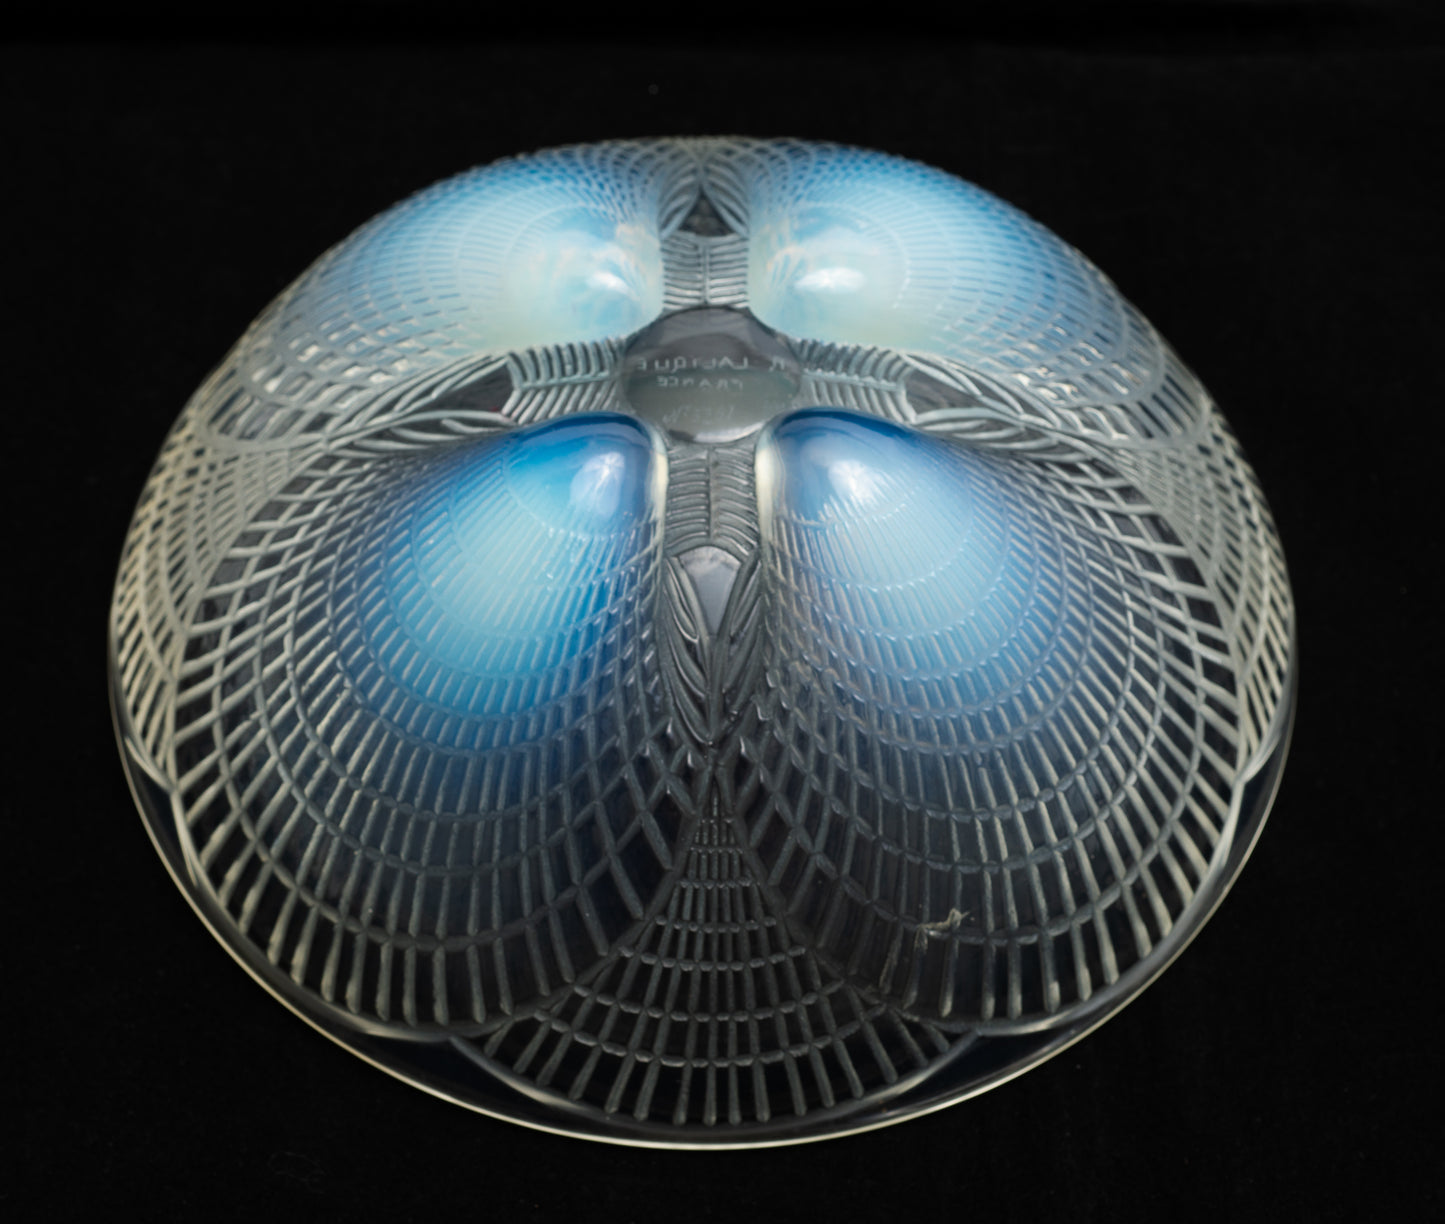 Rene Lalique Coquilles Art Deco French Opalescent Glass Bowl c1925 (Code 2152)